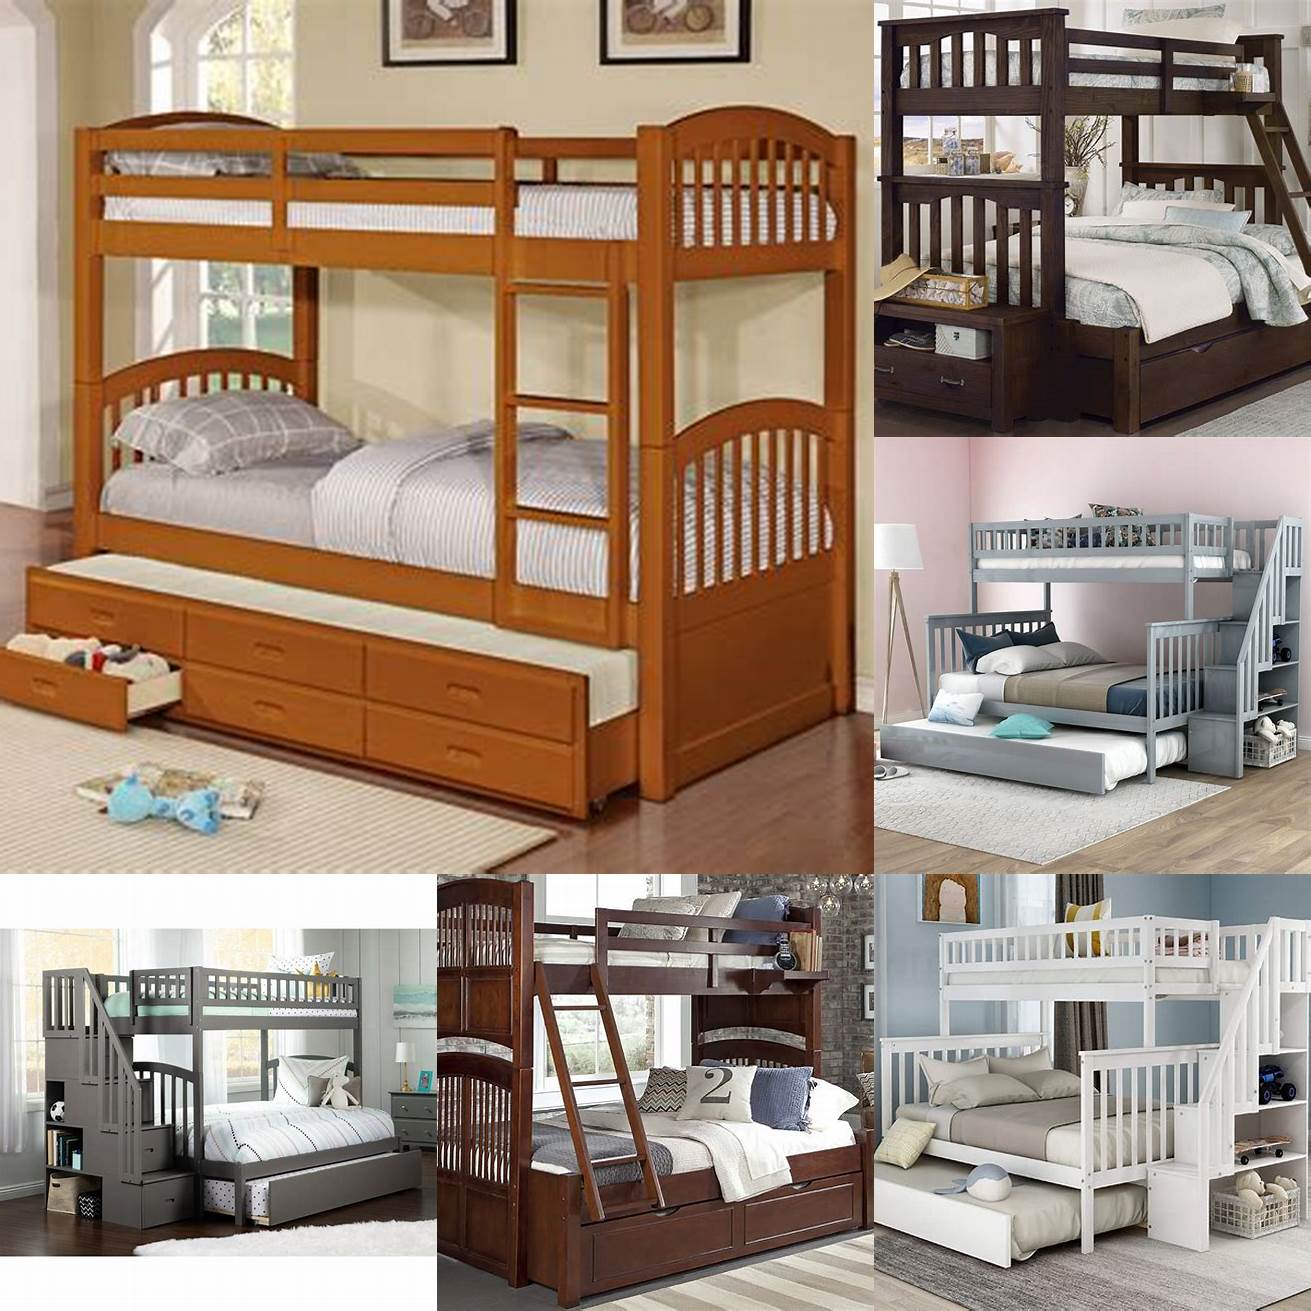 Bunk beds with trundle This type of bed features a twin-size or full-size trundle bed that can be placed under a bunk bed frame It is perfect for kids rooms or vacation homes where you need to maximize sleeping space